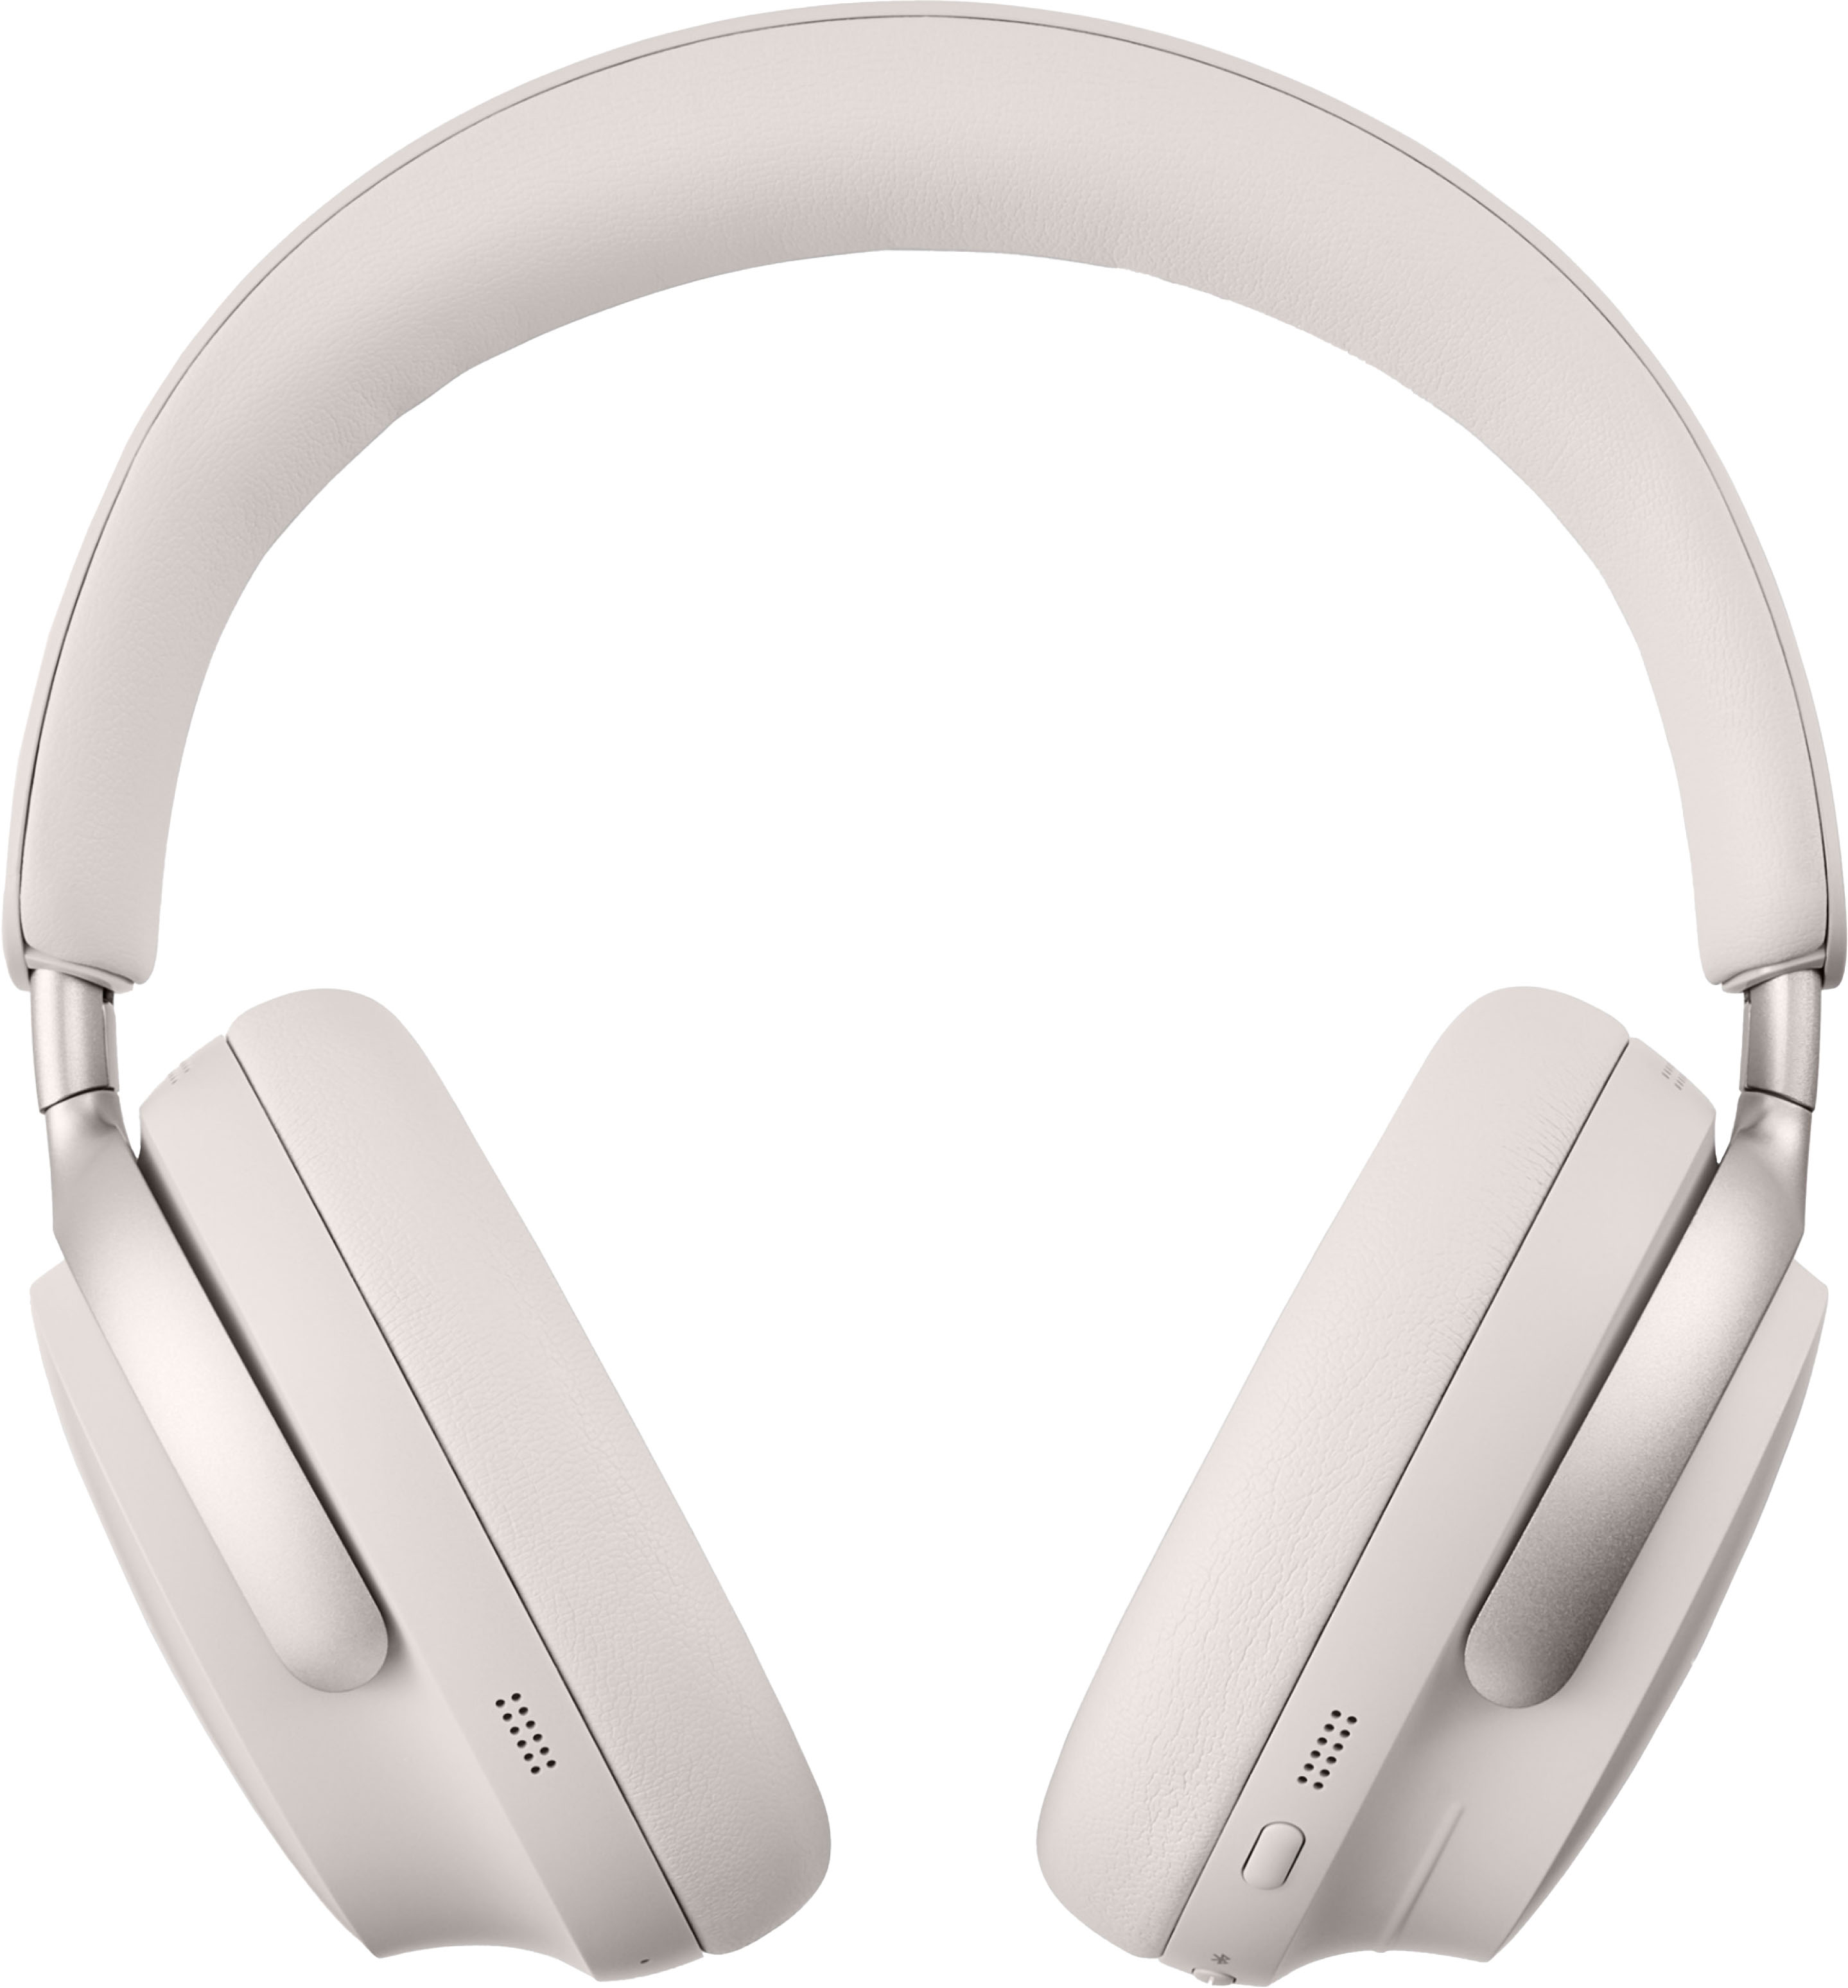 Bose Bluetooth Over-Ear Headphones, Noise Cancelling, White, 794297-0400 